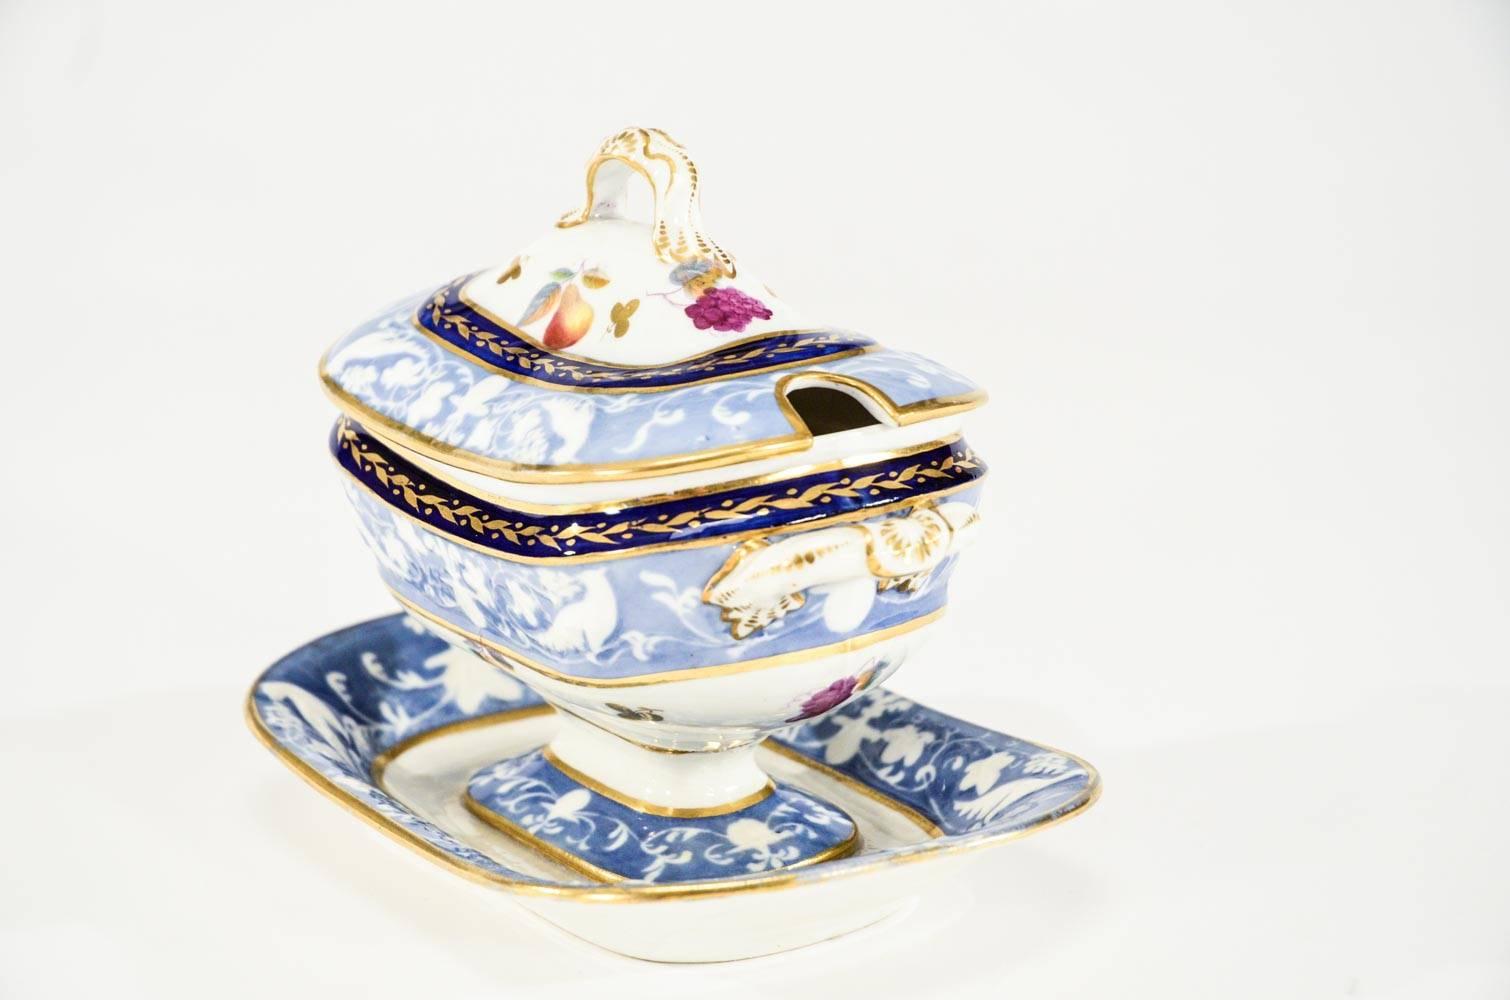 Porcelain Pair of 19th Century Hand-Painted Spode Sauce Tureens For Sale